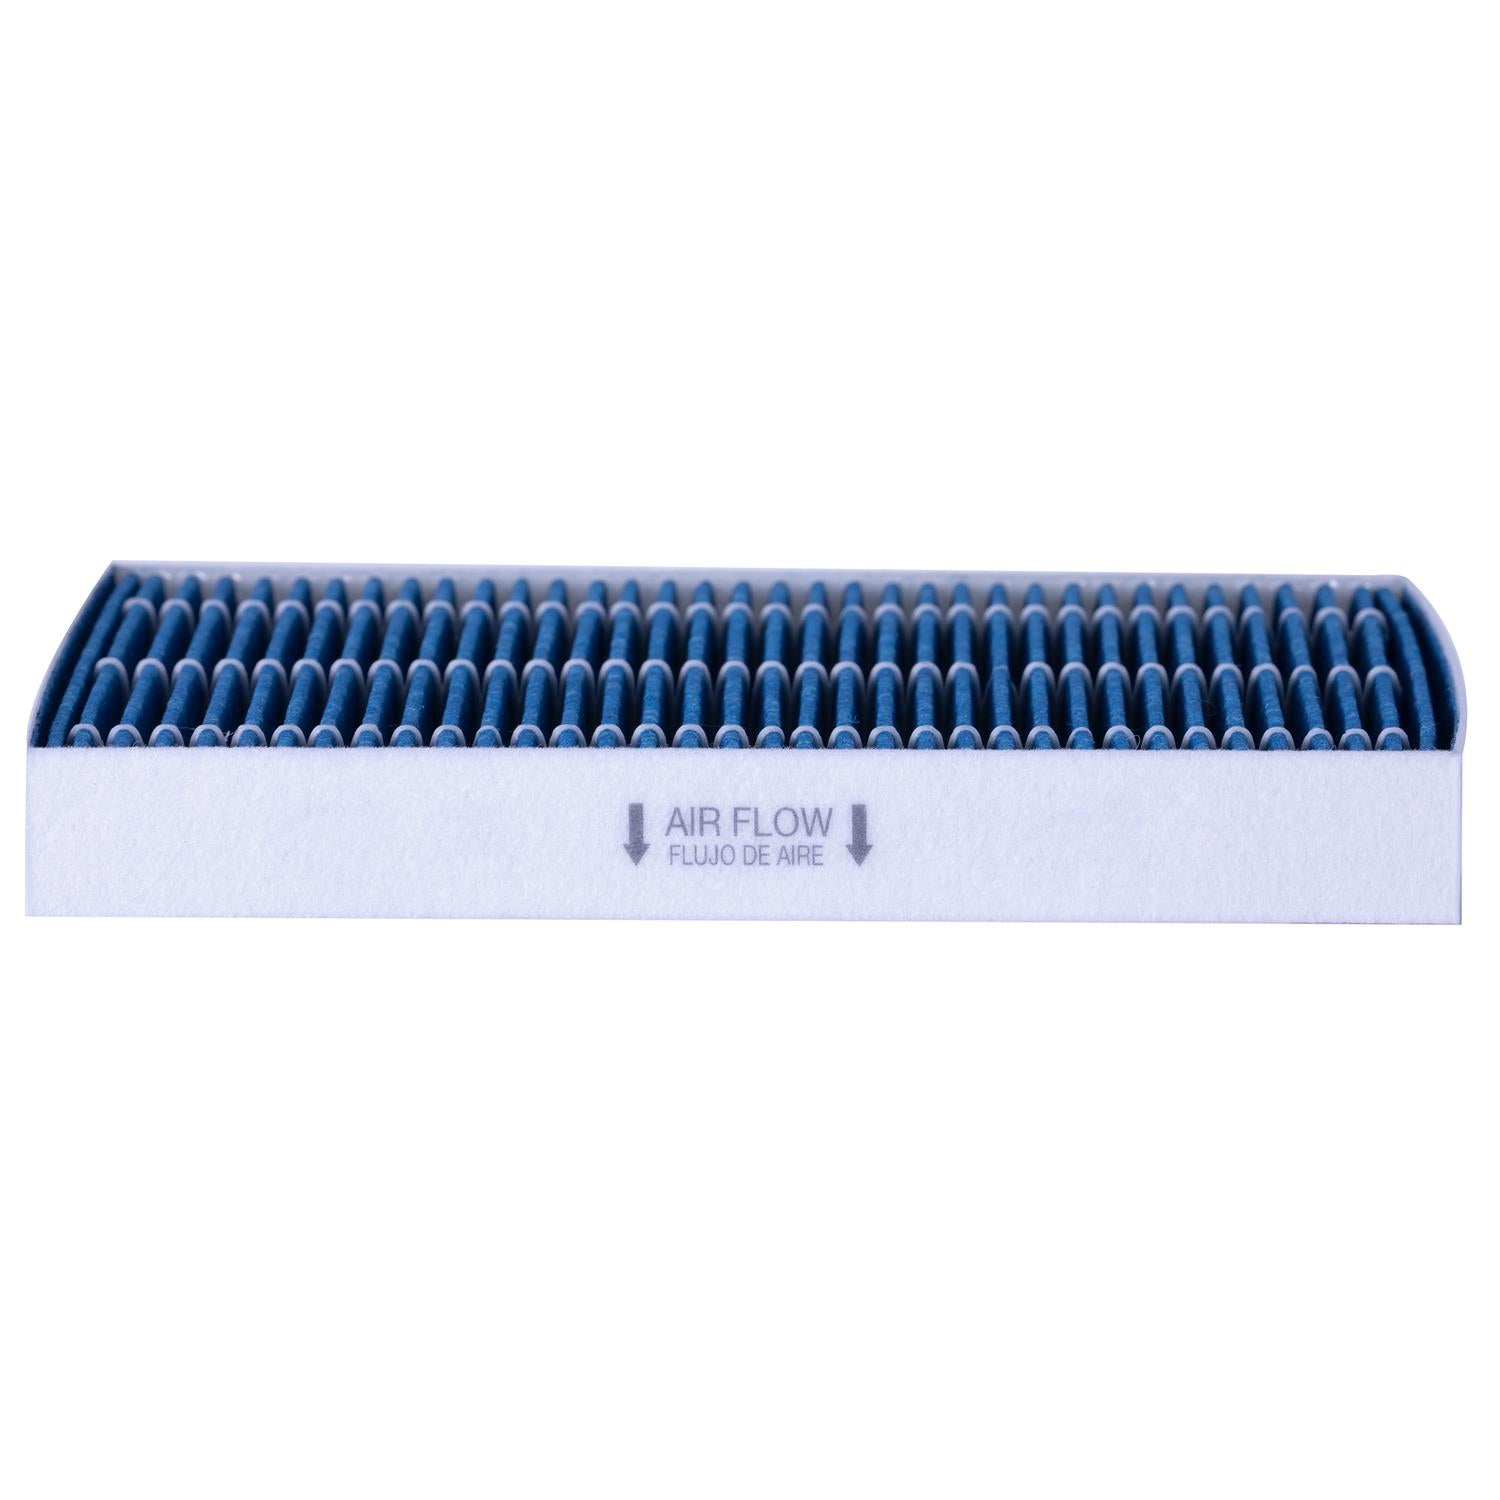 PUREFLOW 2020 Audi TT RS Quattro Cabin Air Filter with HEPA and Antibacterial Technology, PC99204HX